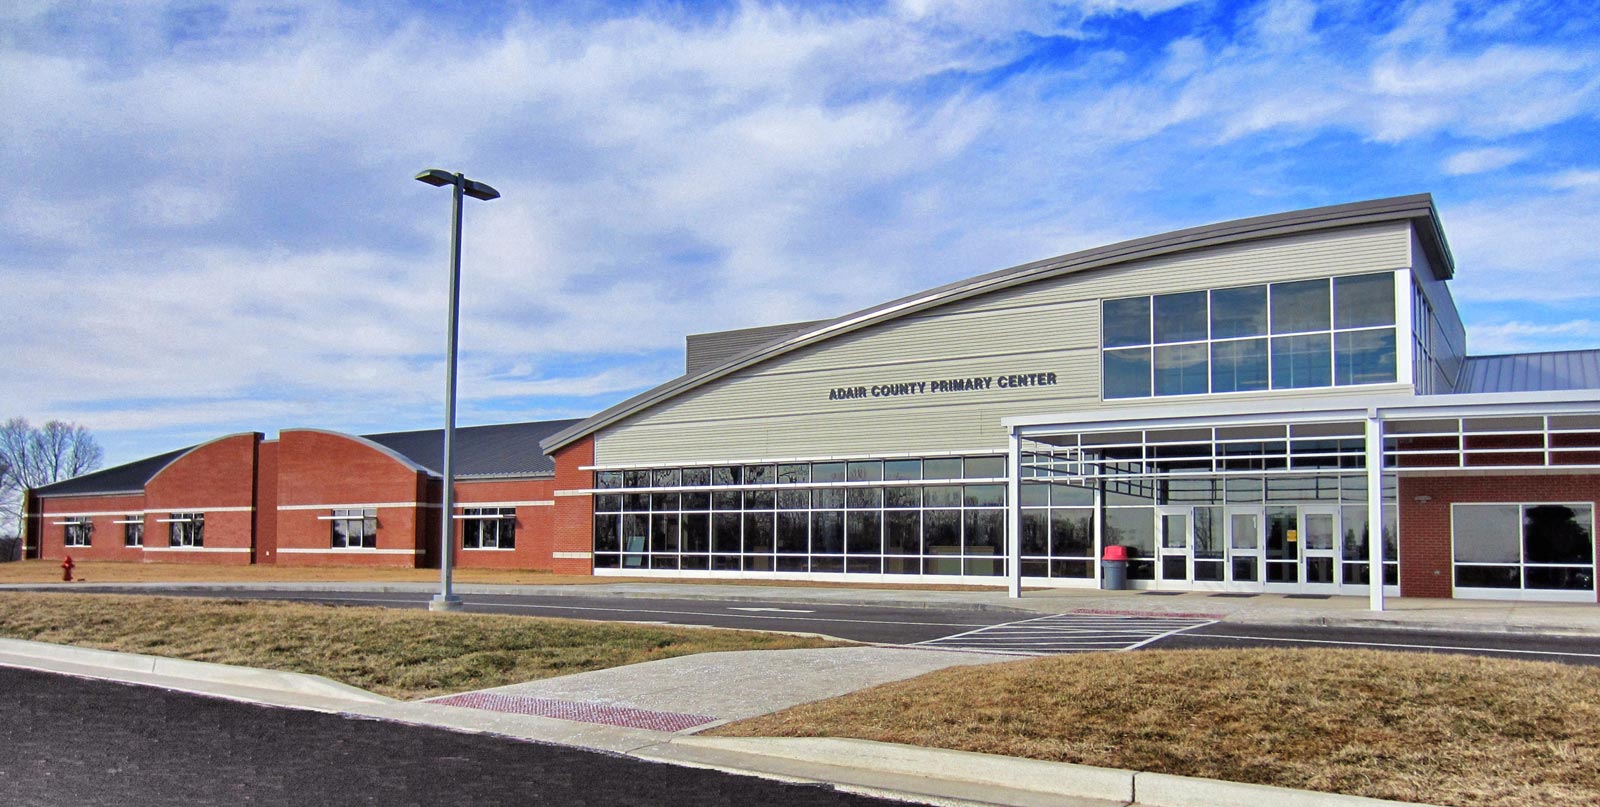 Adair County Primary Center